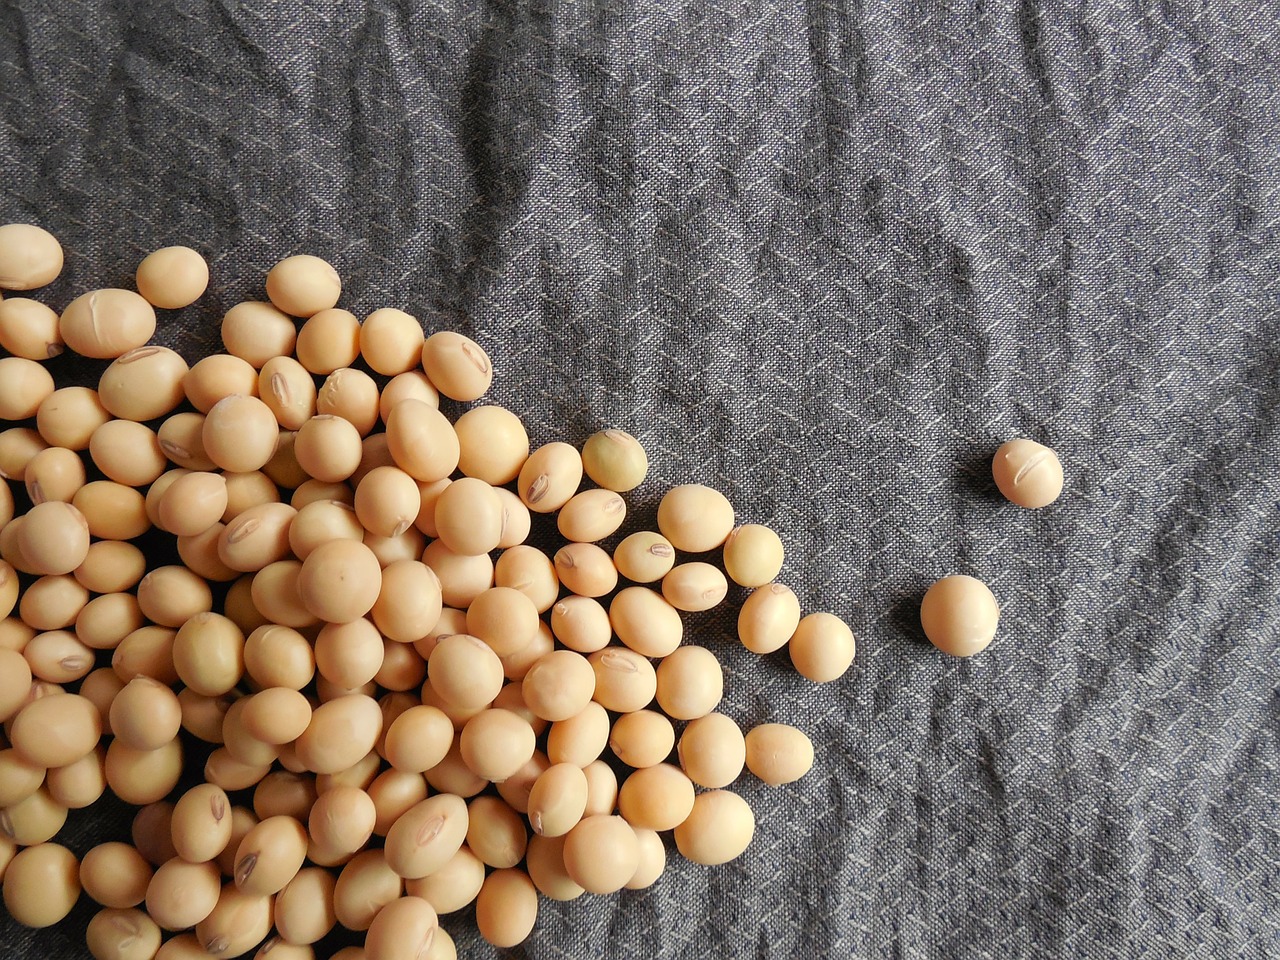 soybeans-182294_1280